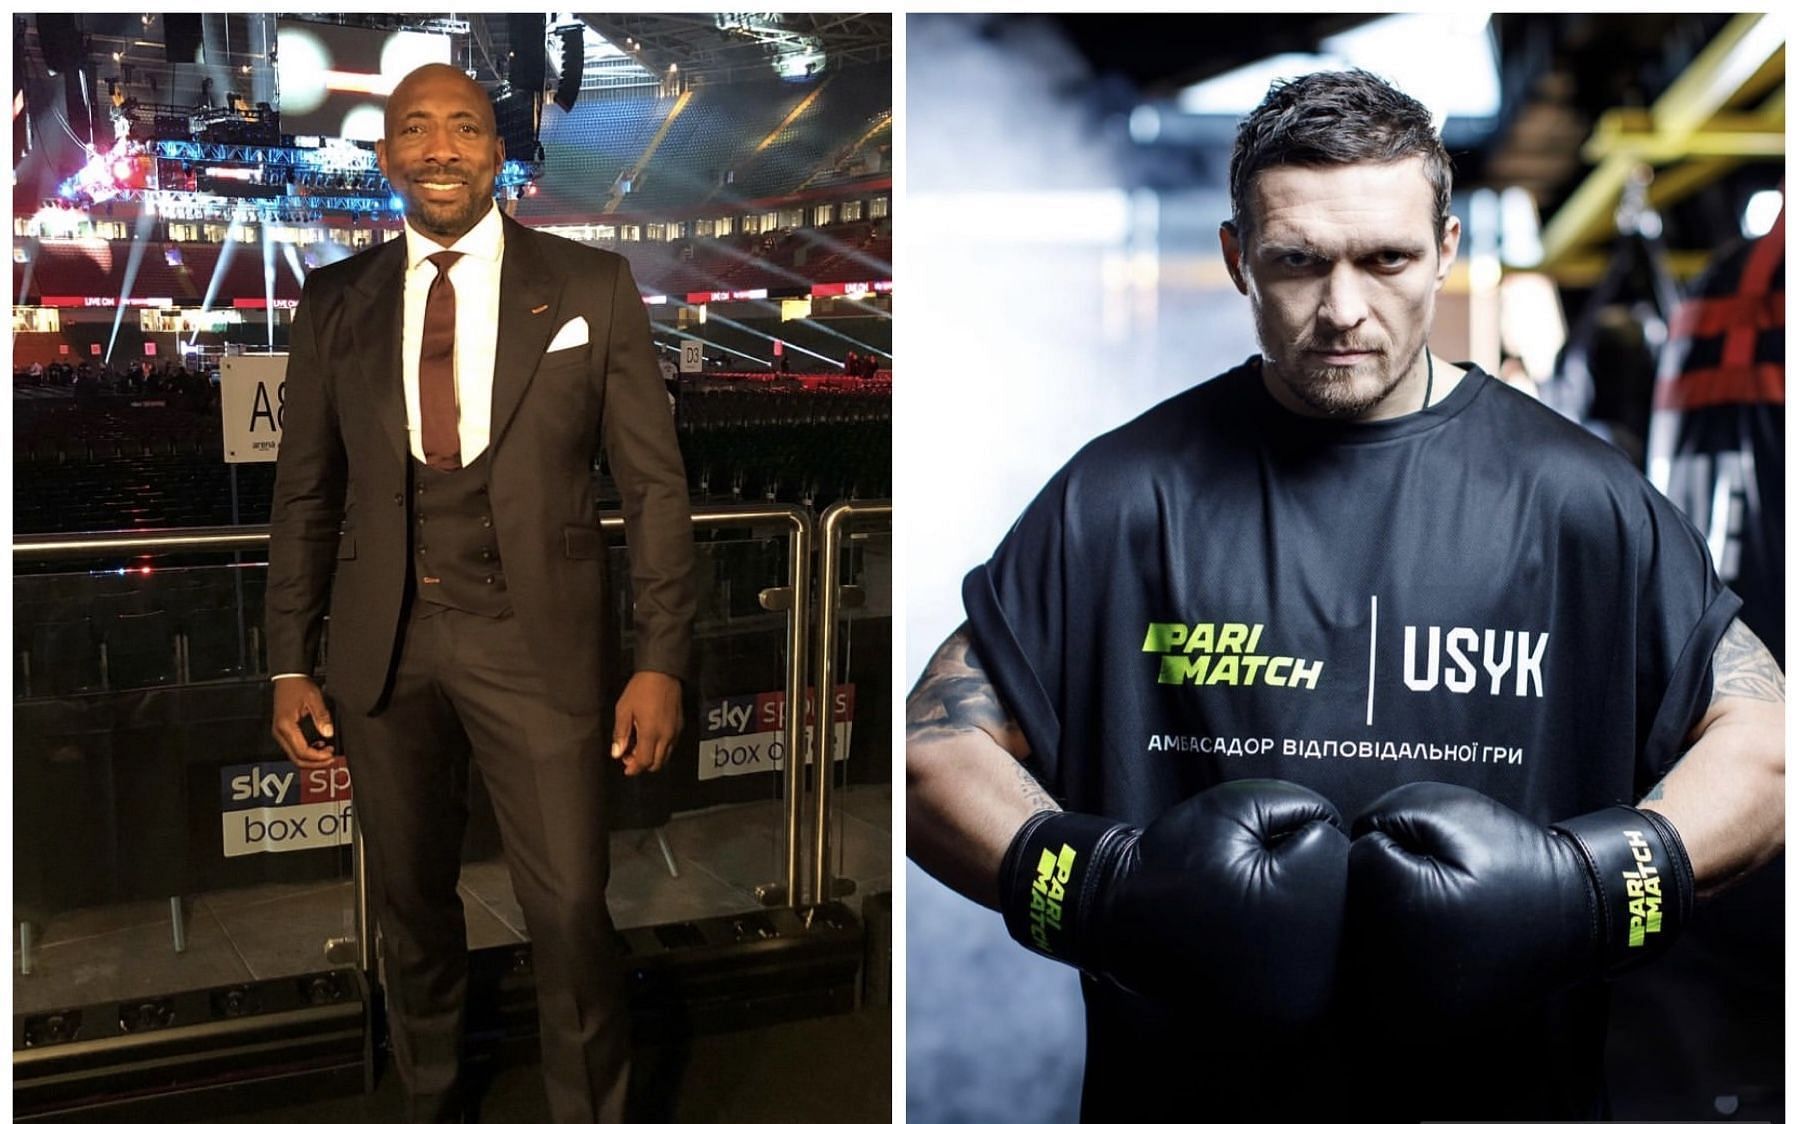 Johnny Nelson (left), Oleksandr Usyk (right) - Images via @johnnynelsonsky and @usykaa on Instagram